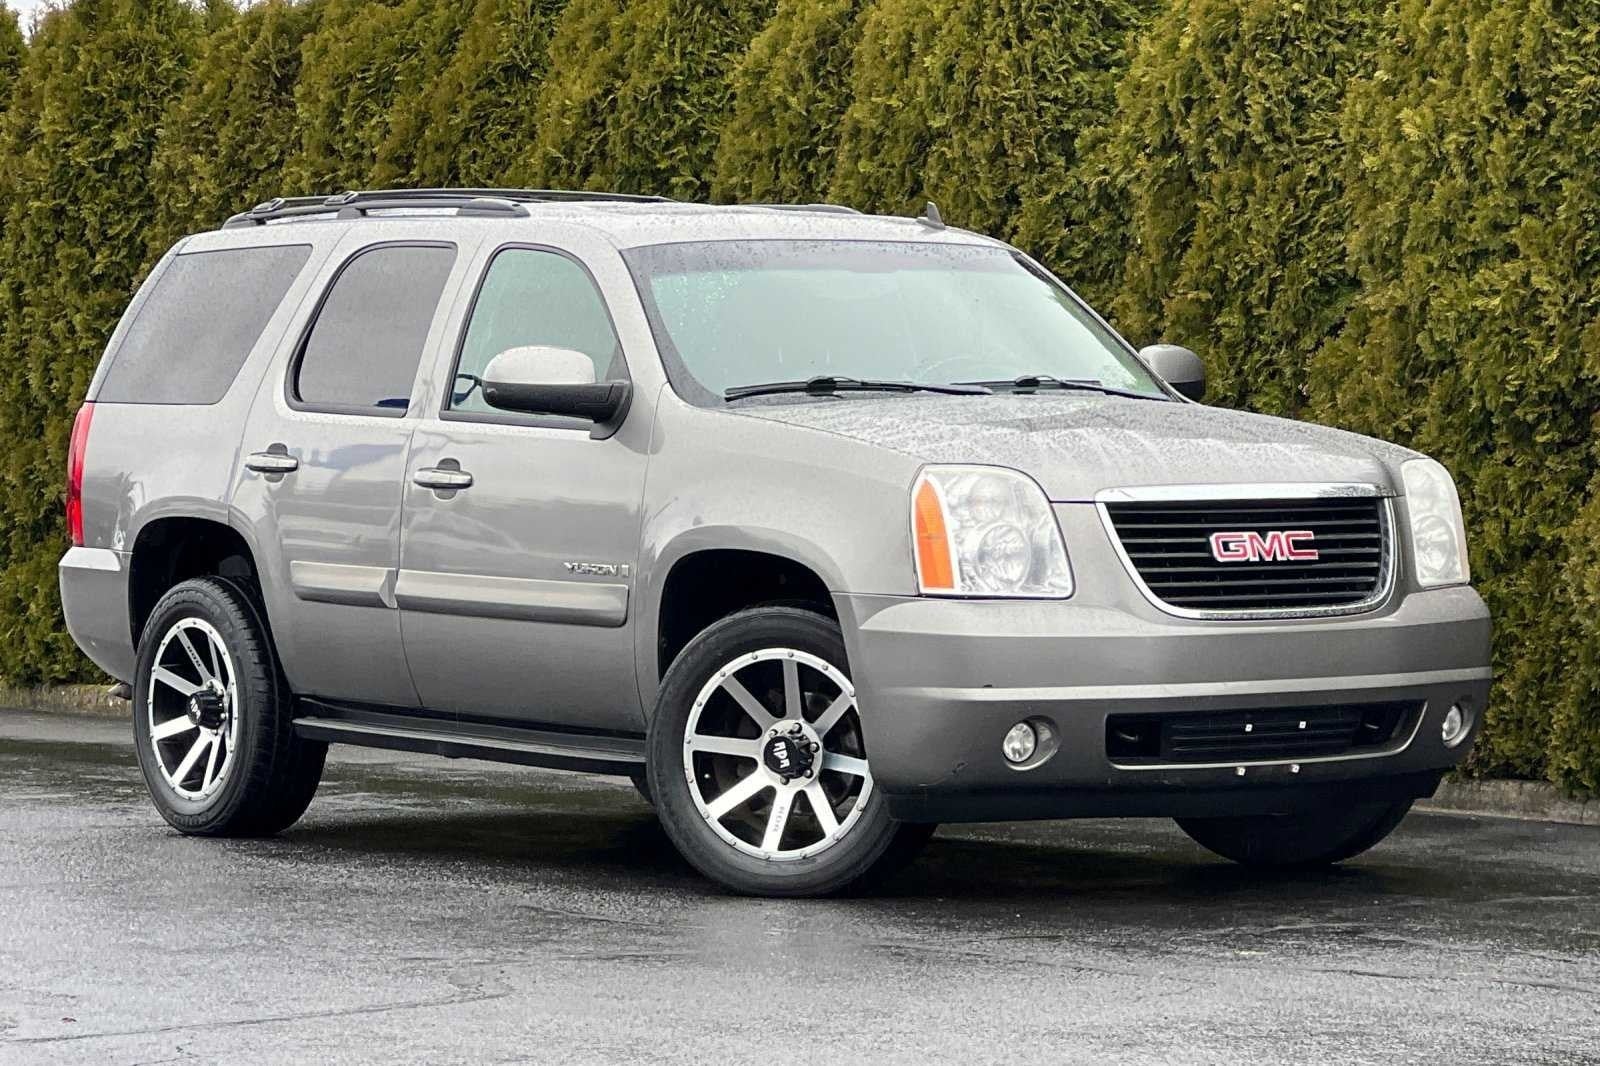 Used 2009 GMC Yukon SLE1 with VIN 1GKFK23009R163191 for sale in Sublimity, OR